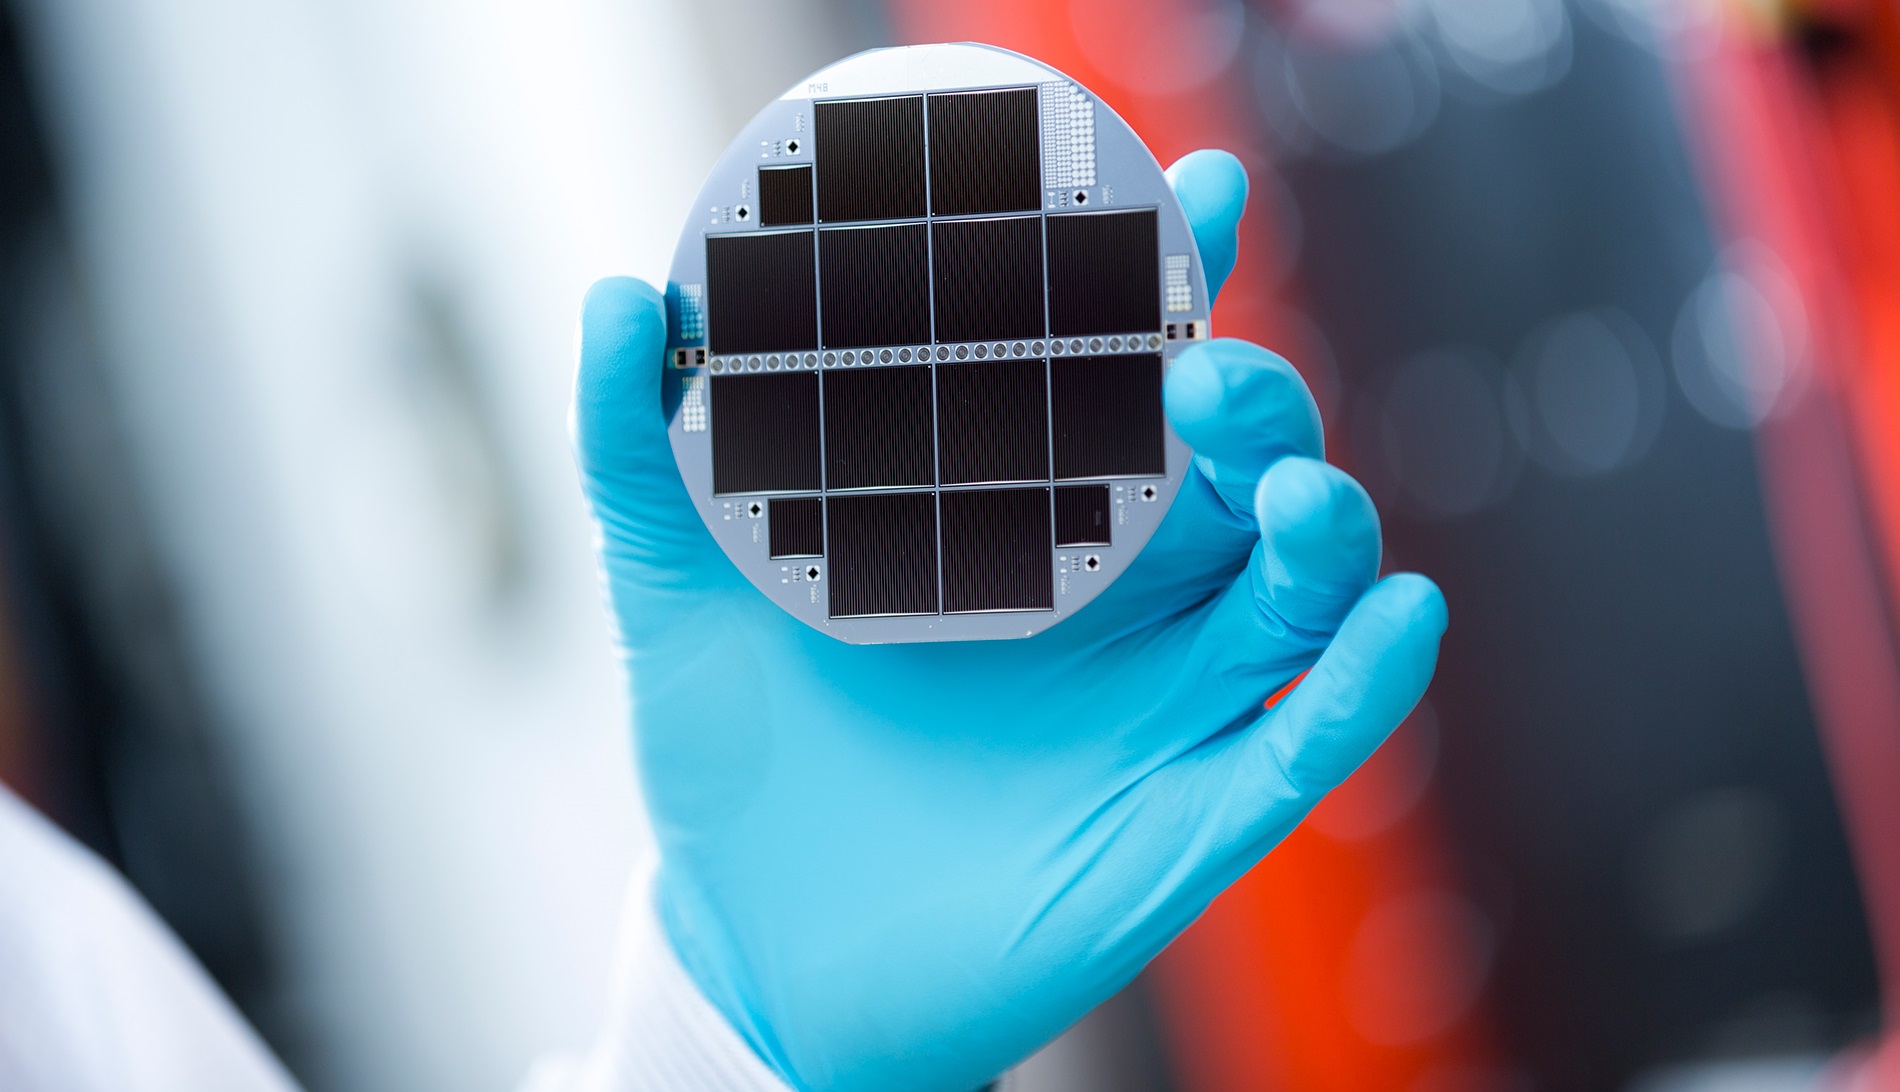 Silicon-based multi-junction solar cell consisting of III-V semiconductors and silicon